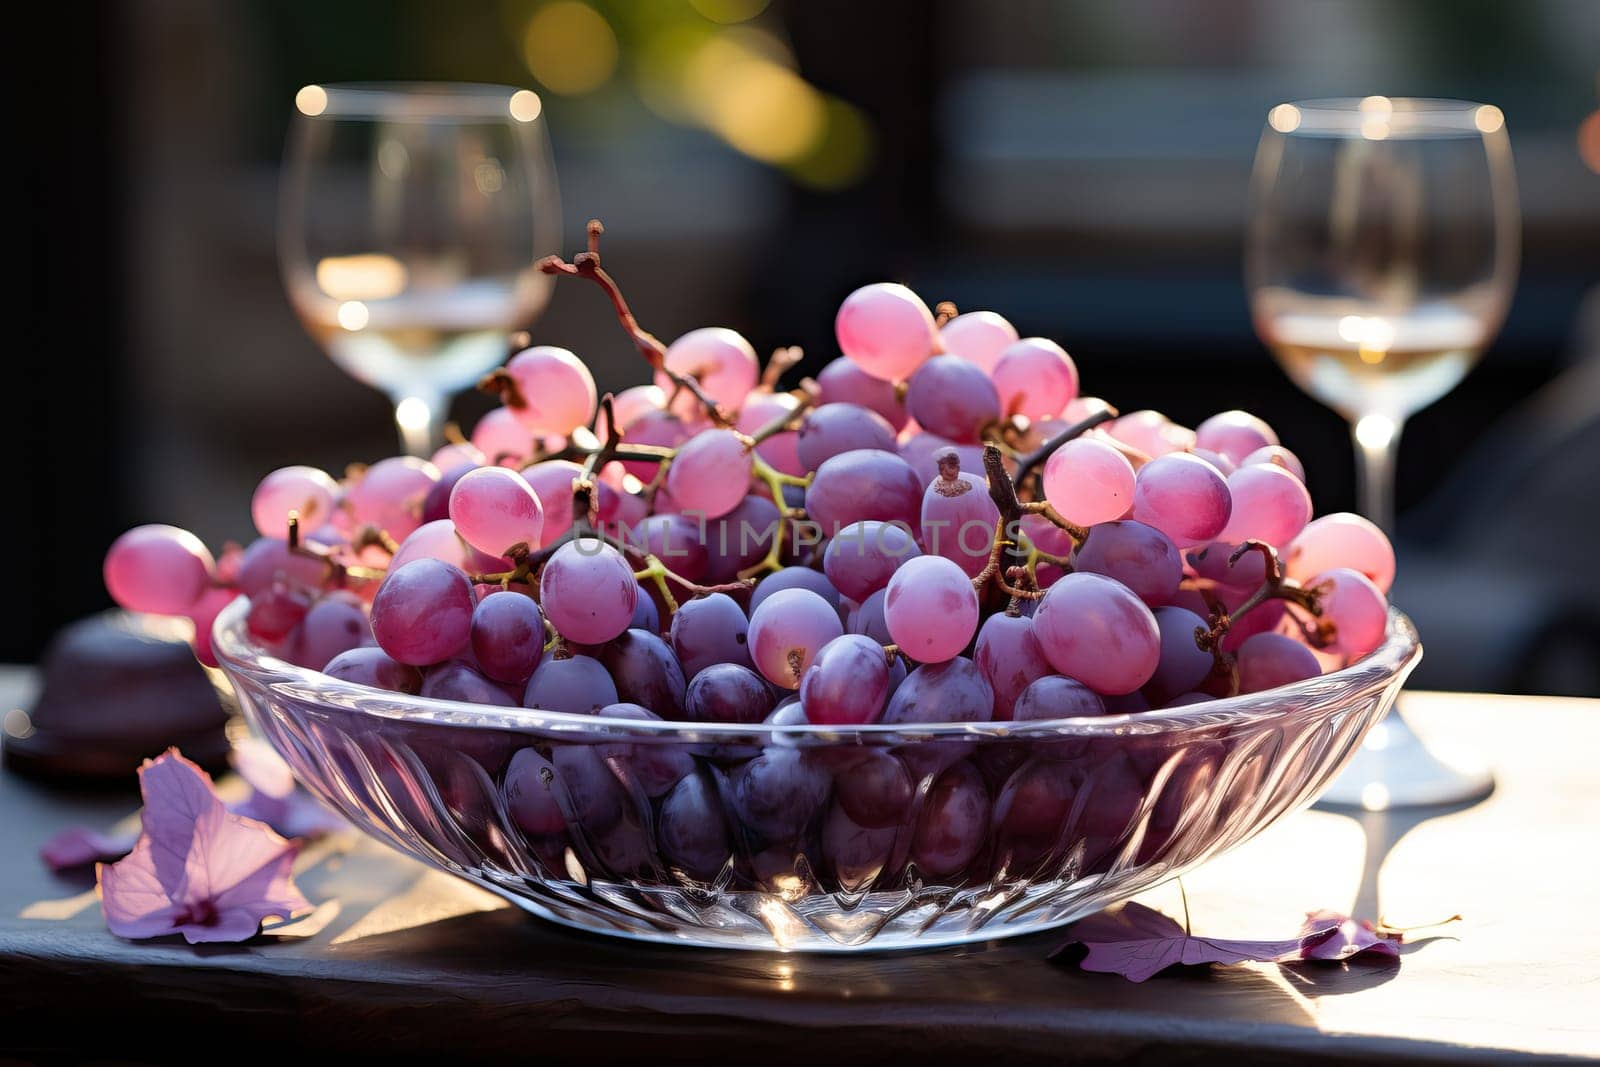 A bowl of purple grapes and two glasses sparkling wine on the table, fresh grapes.